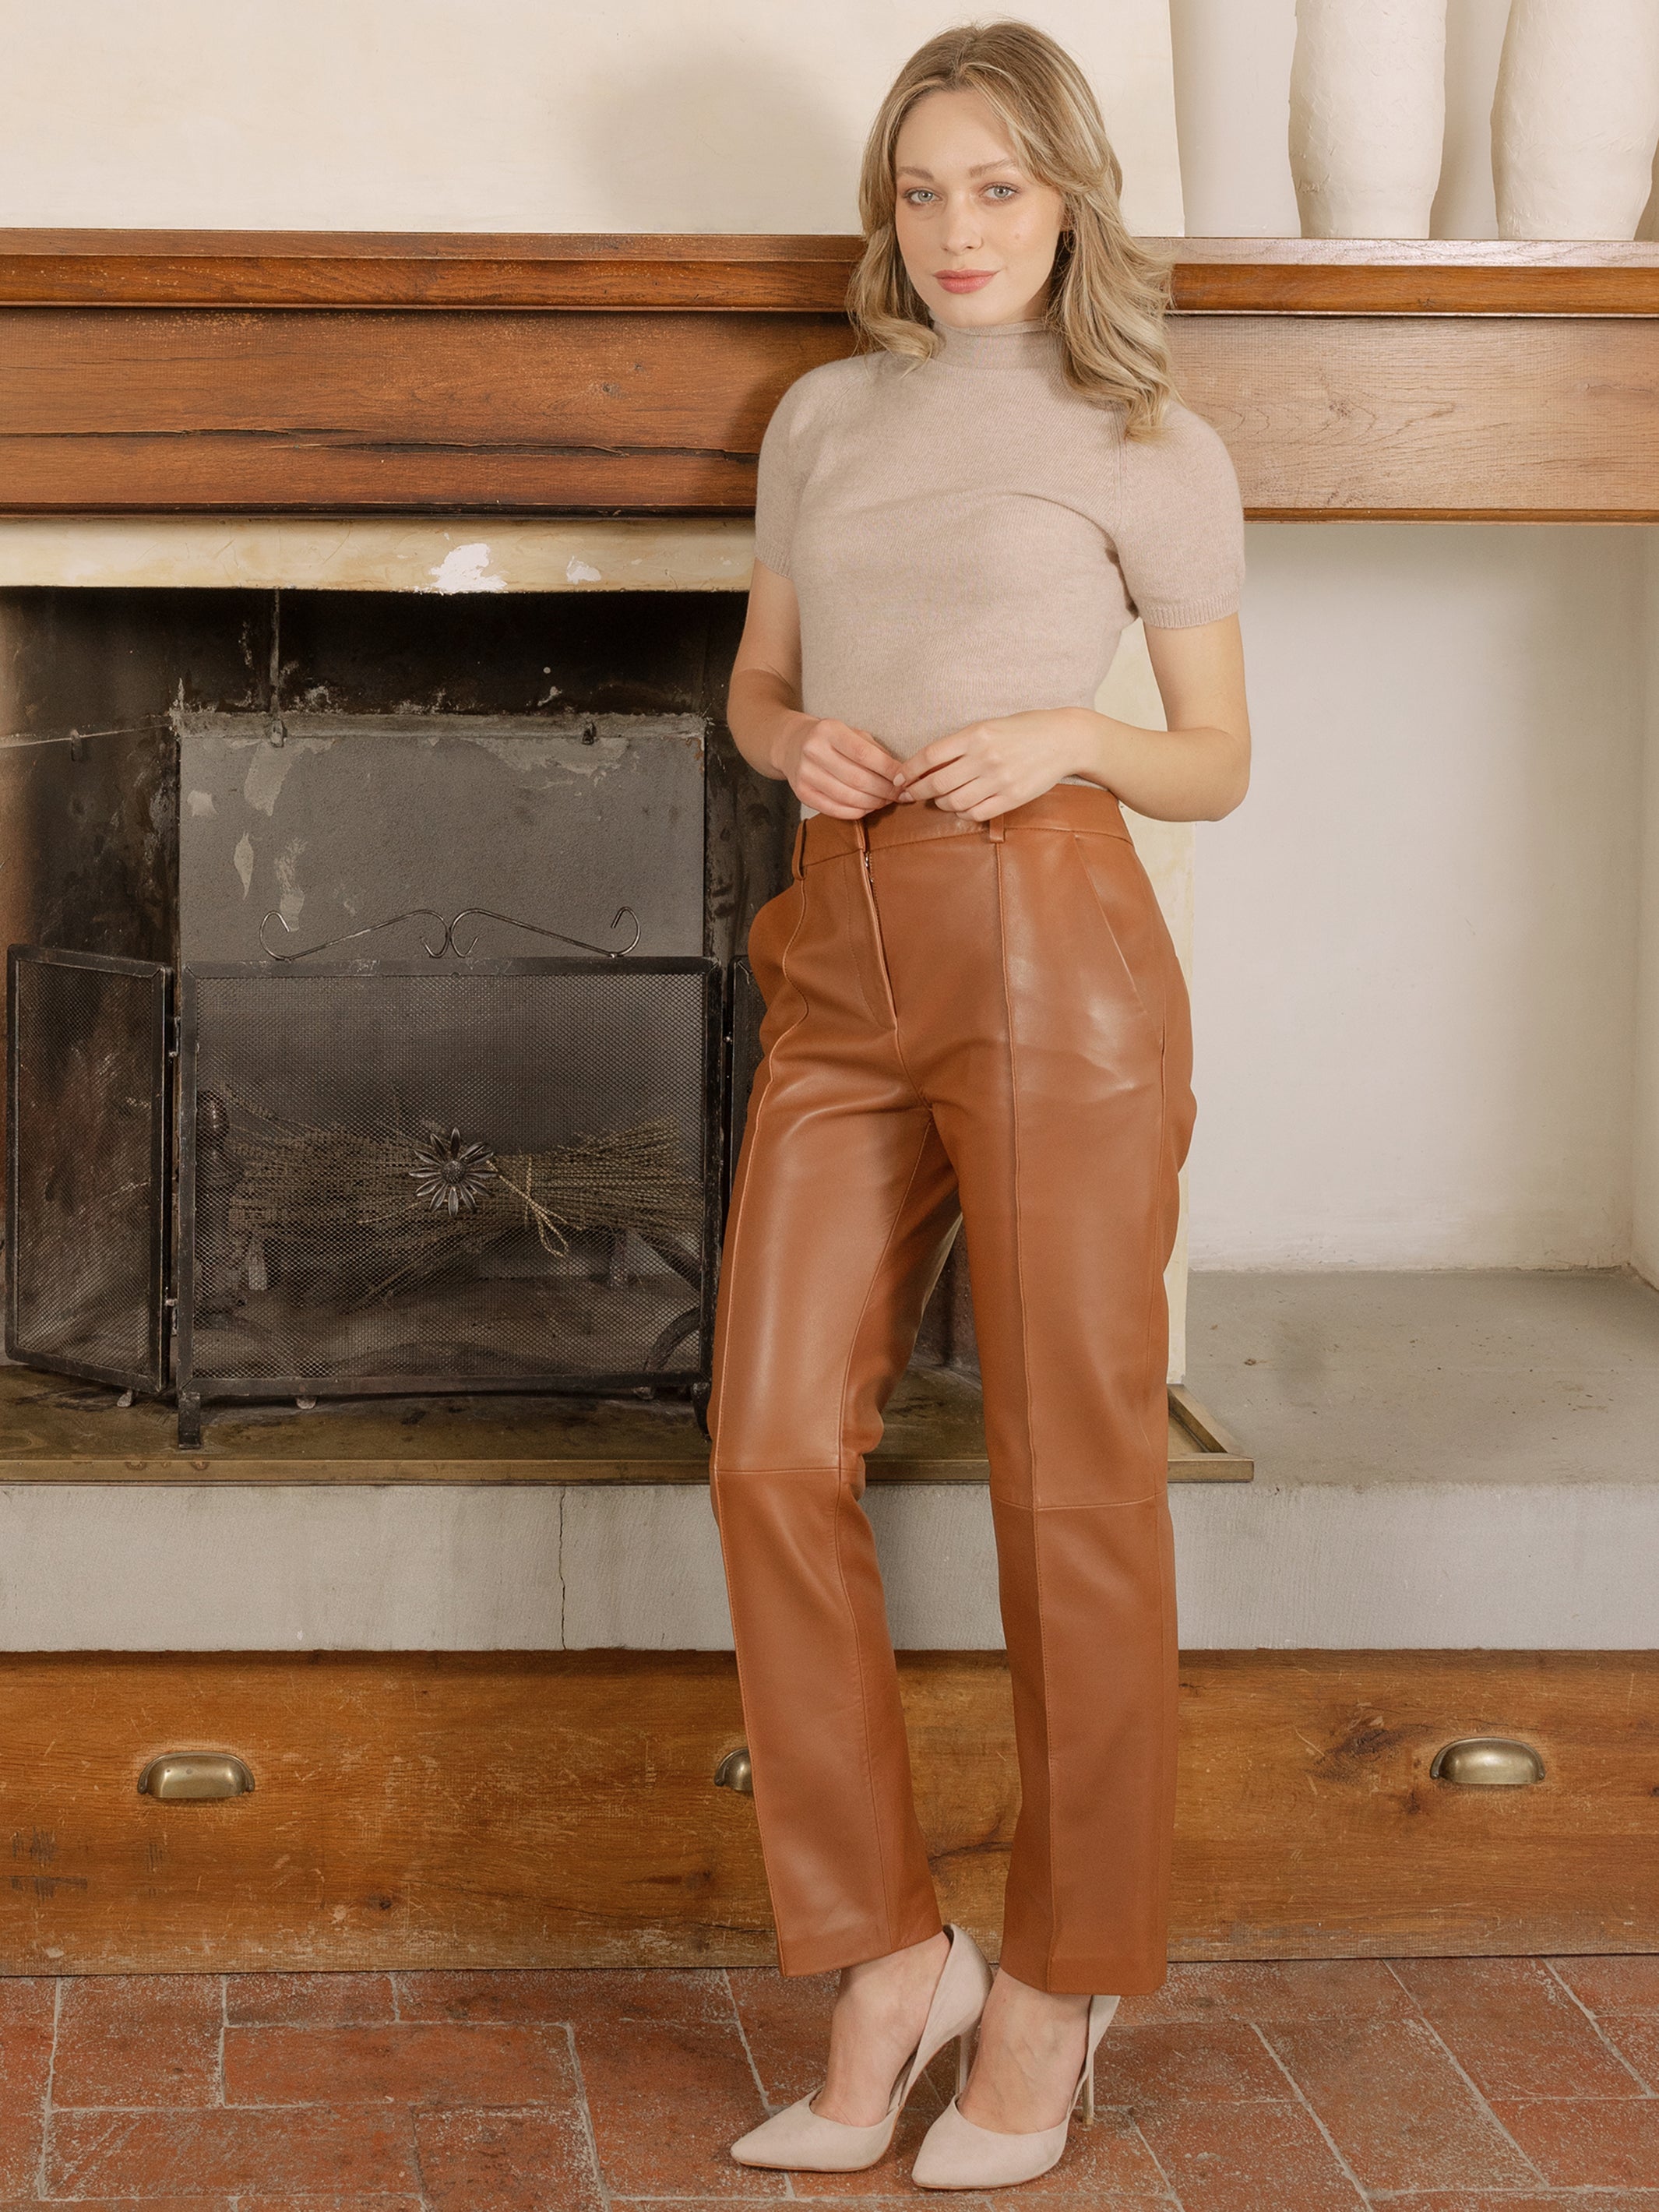 West Broadway Seek Black Leggings Ladies Leather Pants Made By West14th.  Made From 100% Genuine Soft Lamb Leather. For all seasons, Quality To Last  A Lifetime.